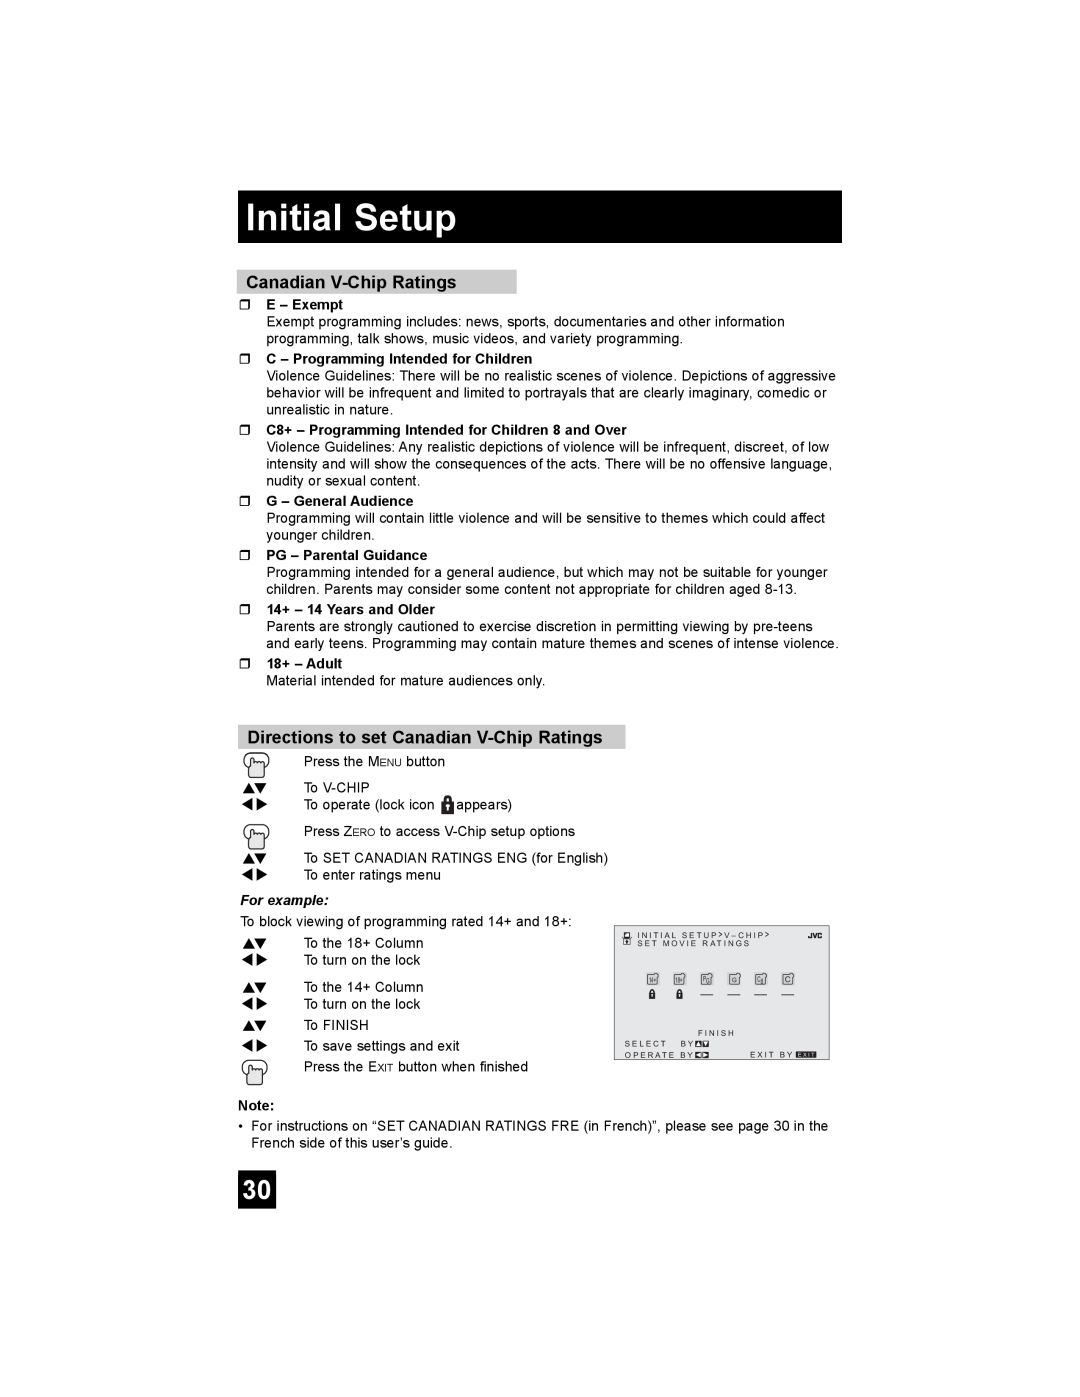 JVC AV 20FA44 manual Directions to set Canadian V-Chip Ratings, Initial Setup, For example 